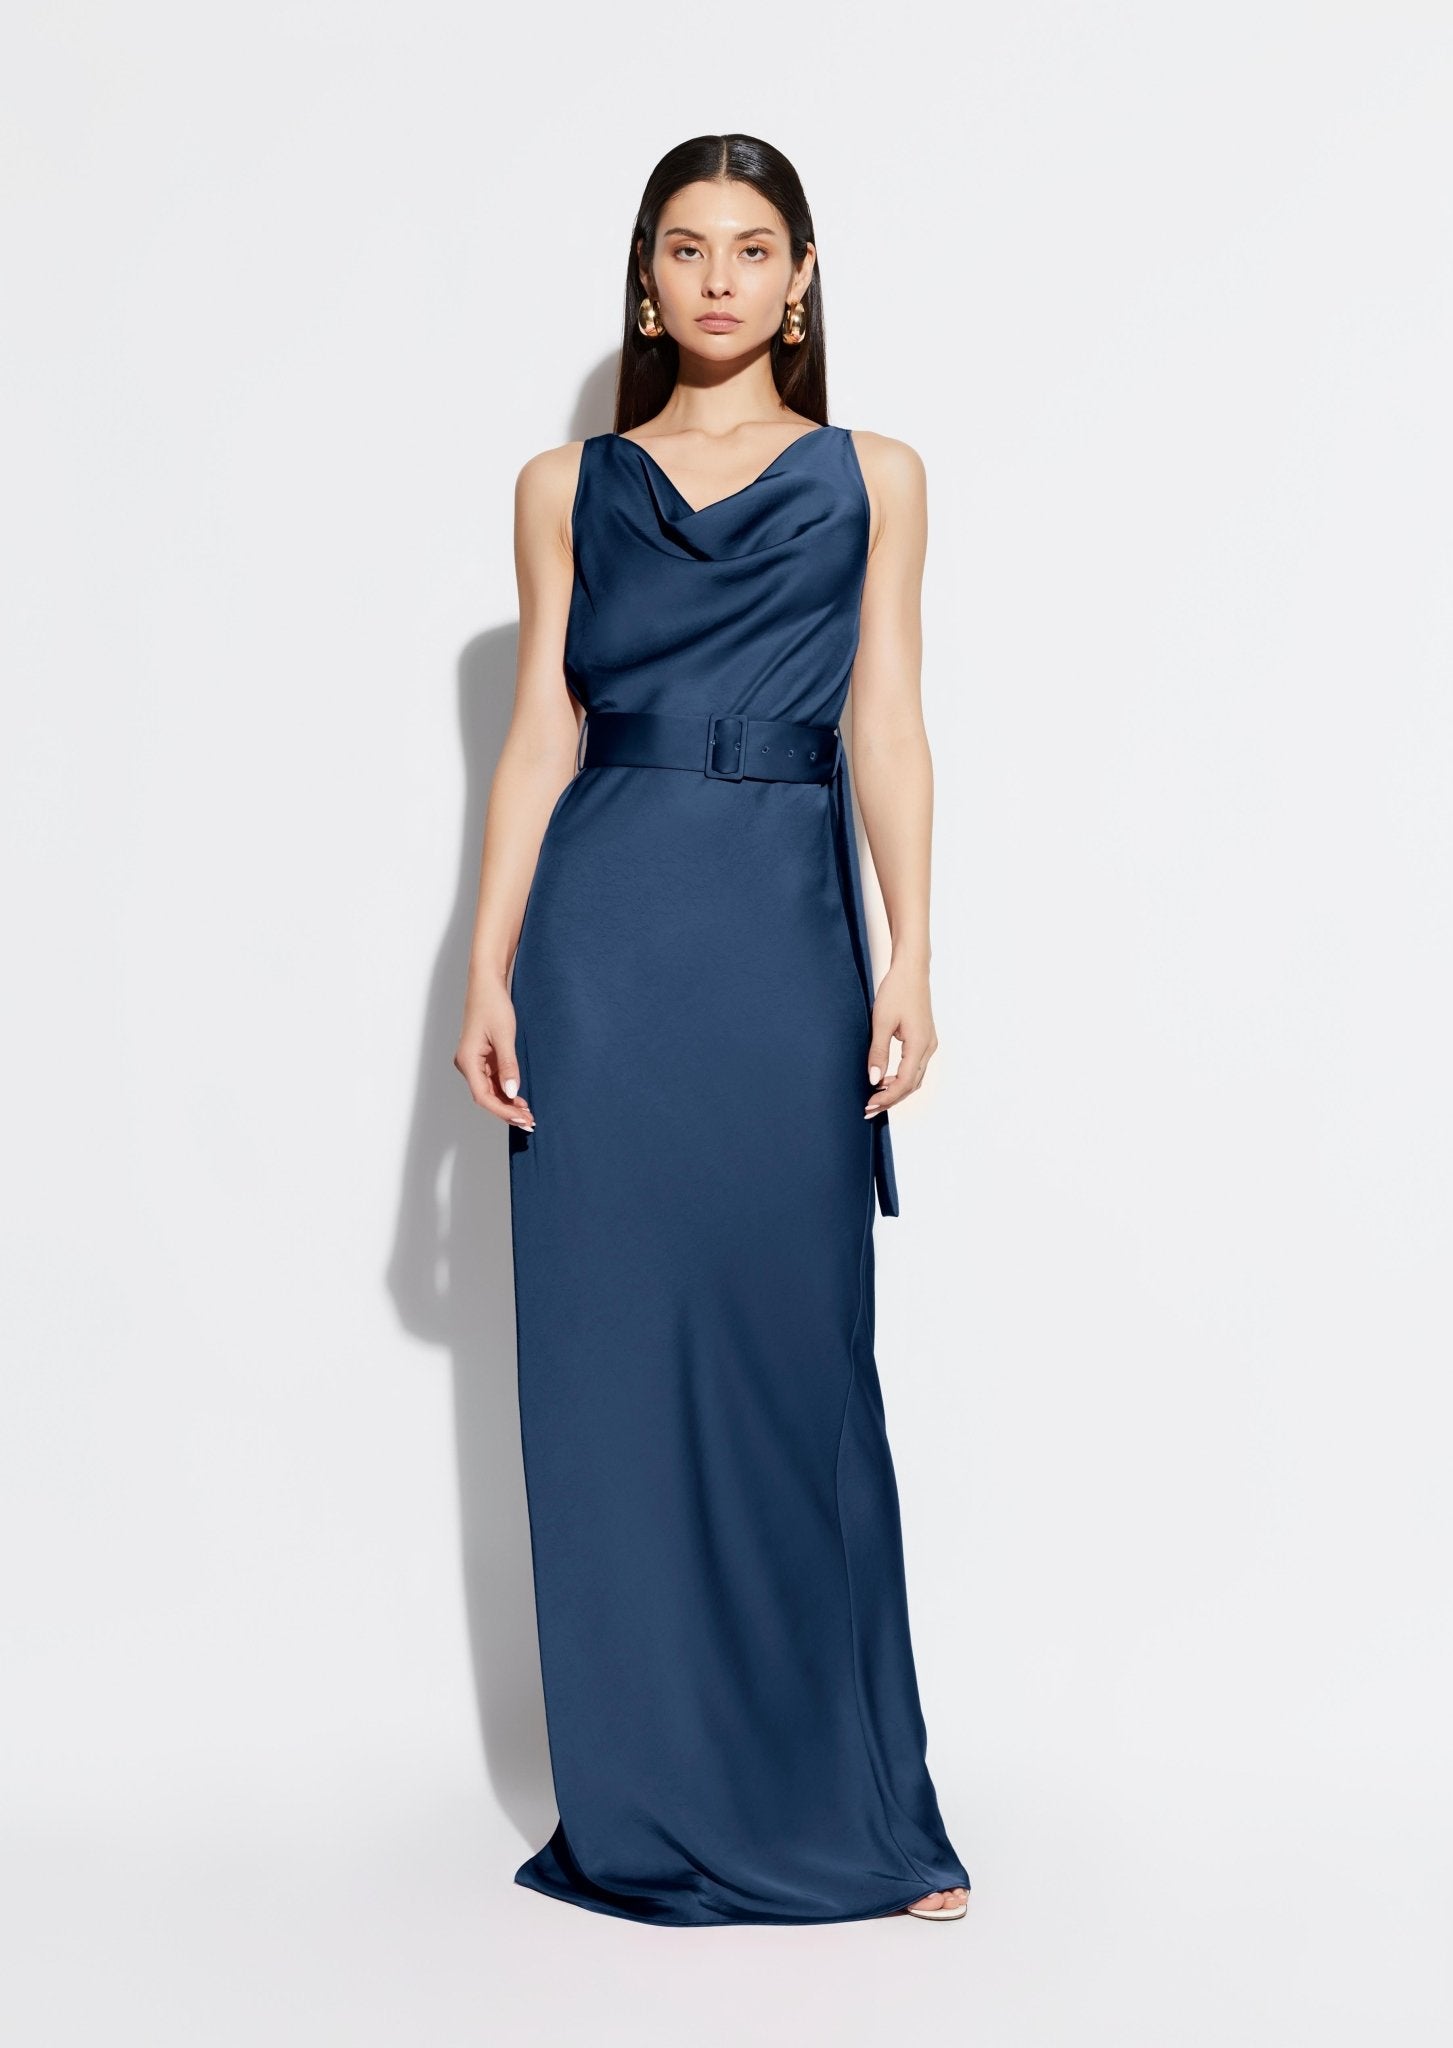 Satin Bias Belted Gown - LAPOINTE